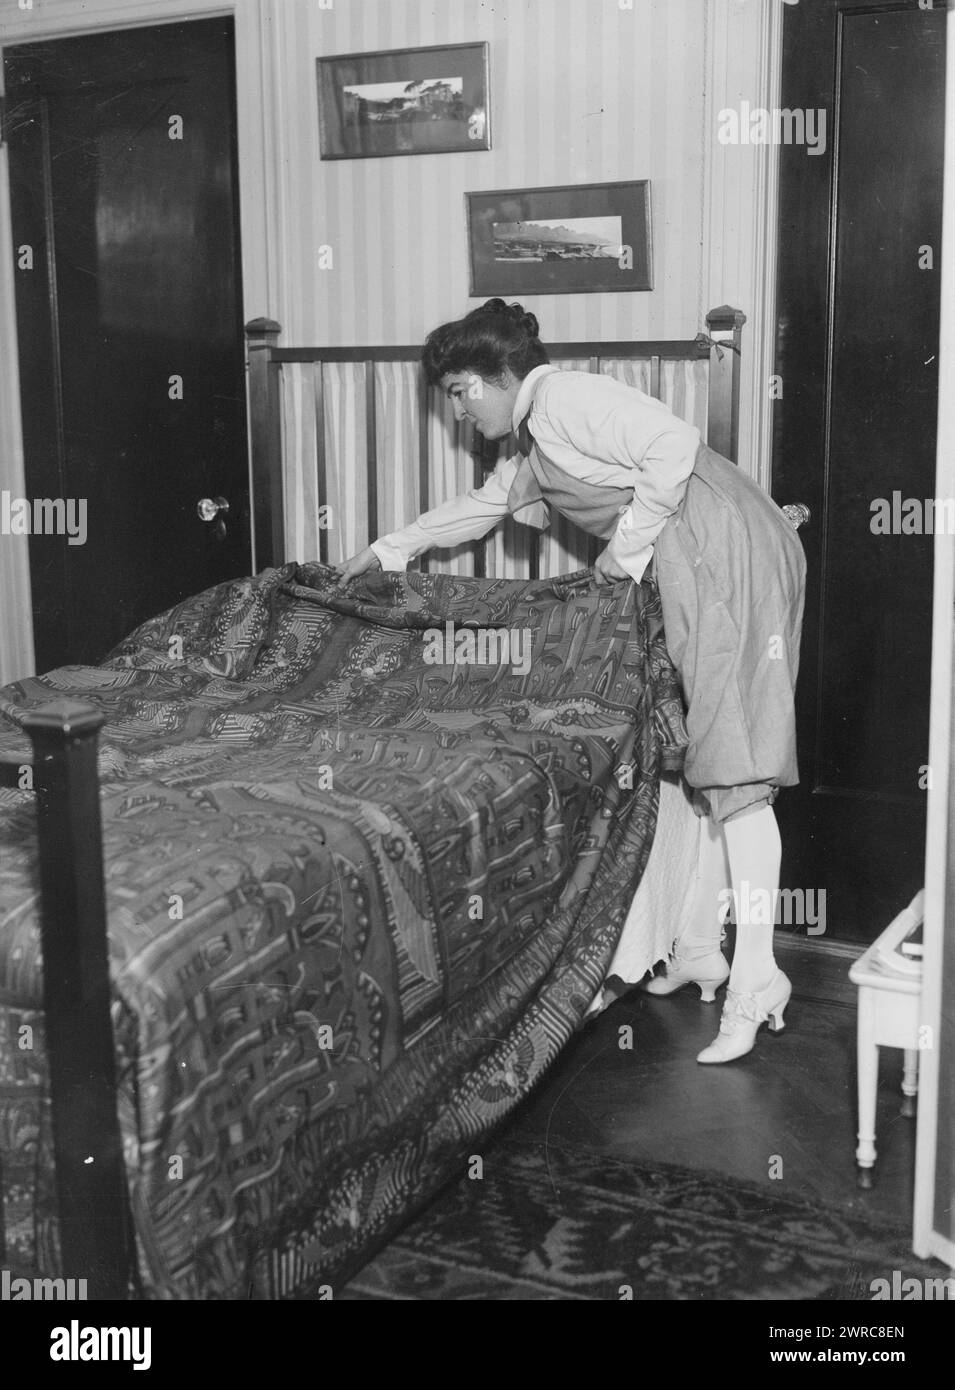 Maude i.e. Maud Powell, Photo shows American violinist Maud Powell (1867-1920) making a bed., between ca. 1915 and ca. 1920, Glass negatives, 1 negative: glass Stock Photo